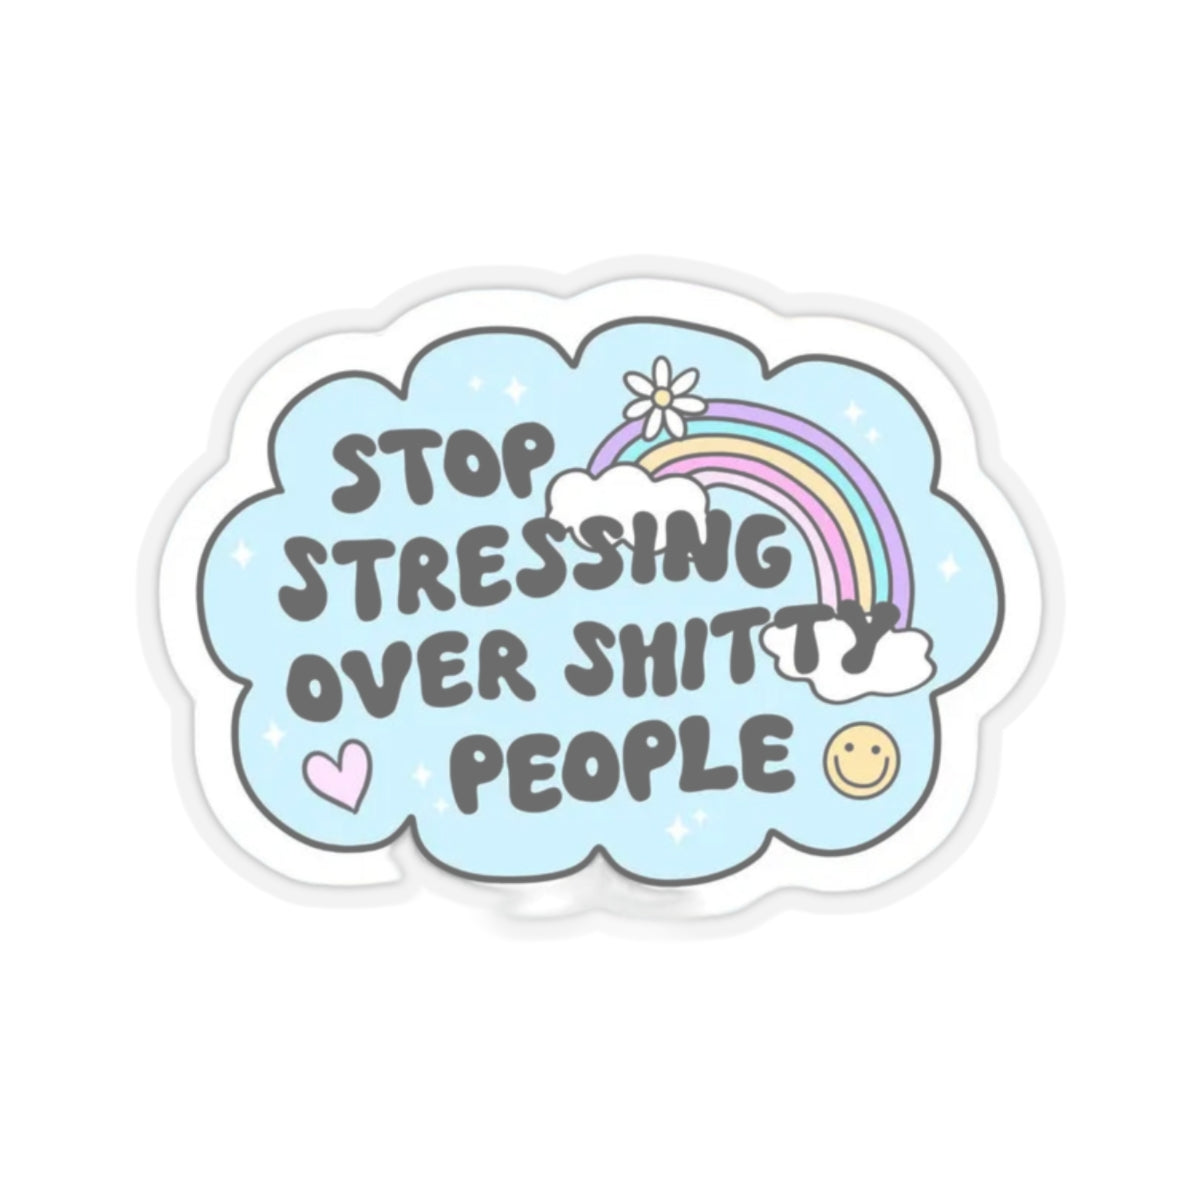 Stop stressing over shitty people Sticker